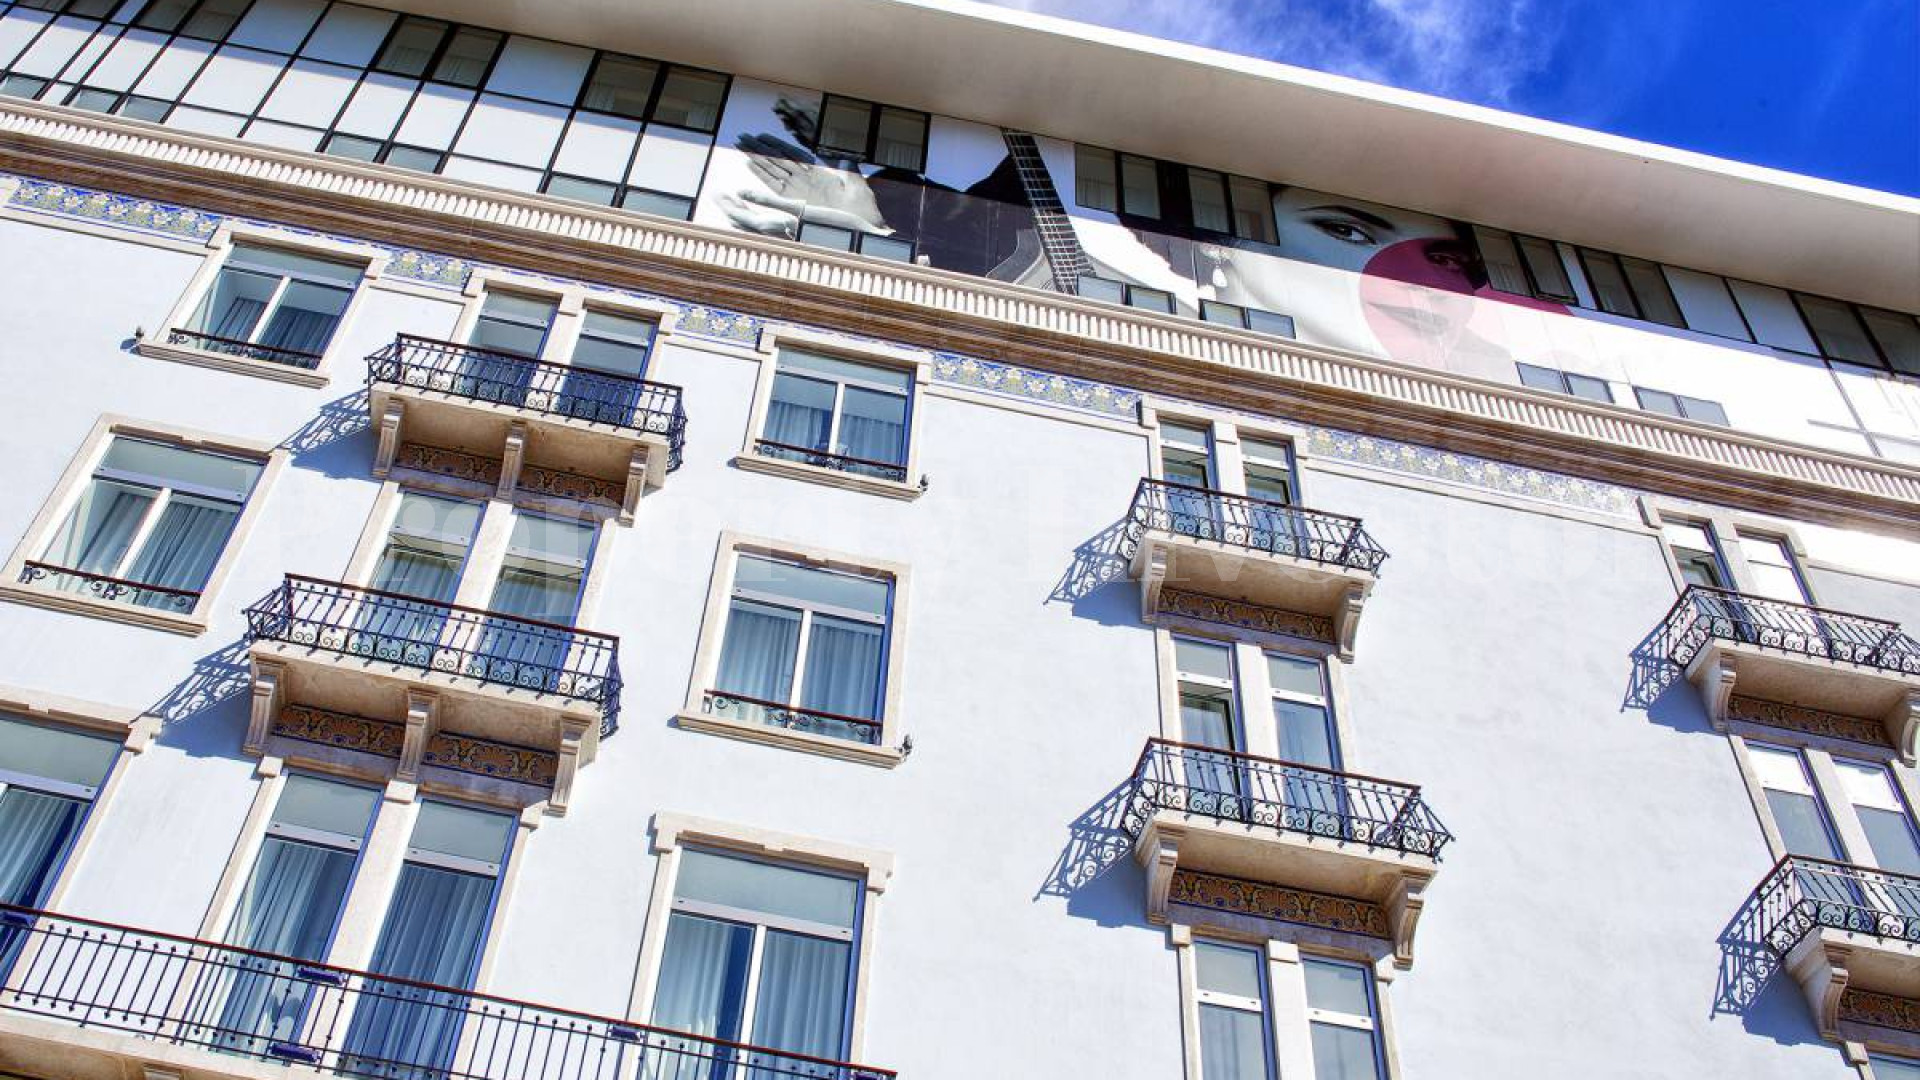 Historical 4* Star Hotel & SPA with 224 Elegant Rooms in the Absolute Centre of Lisbon, Portugal